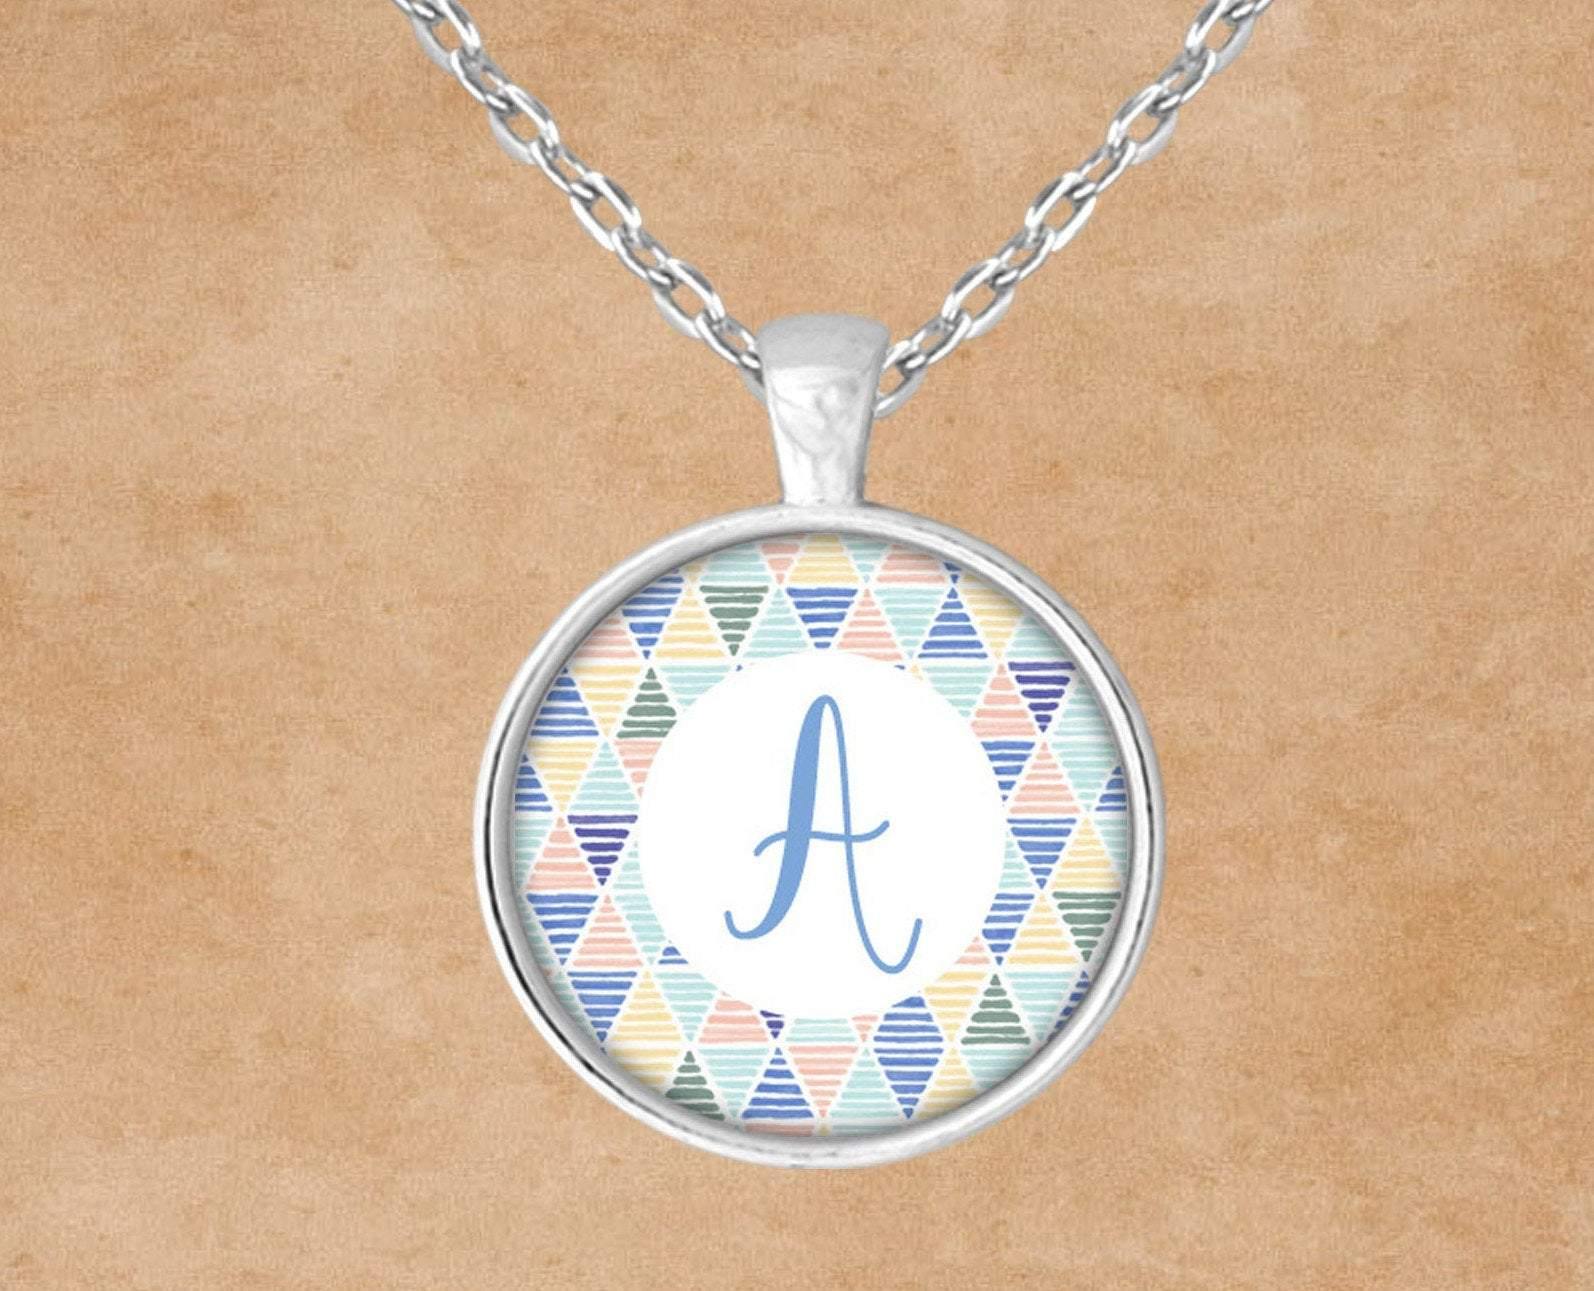 Custom Jewelry | Personalized Jewelry | Pendant Necklace | Summer Monogram - This & That Solutions - Custom Jewelry | Personalized Jewelry | Pendant Necklace | Summer Monogram - Personalized Gifts & Custom Home Decor